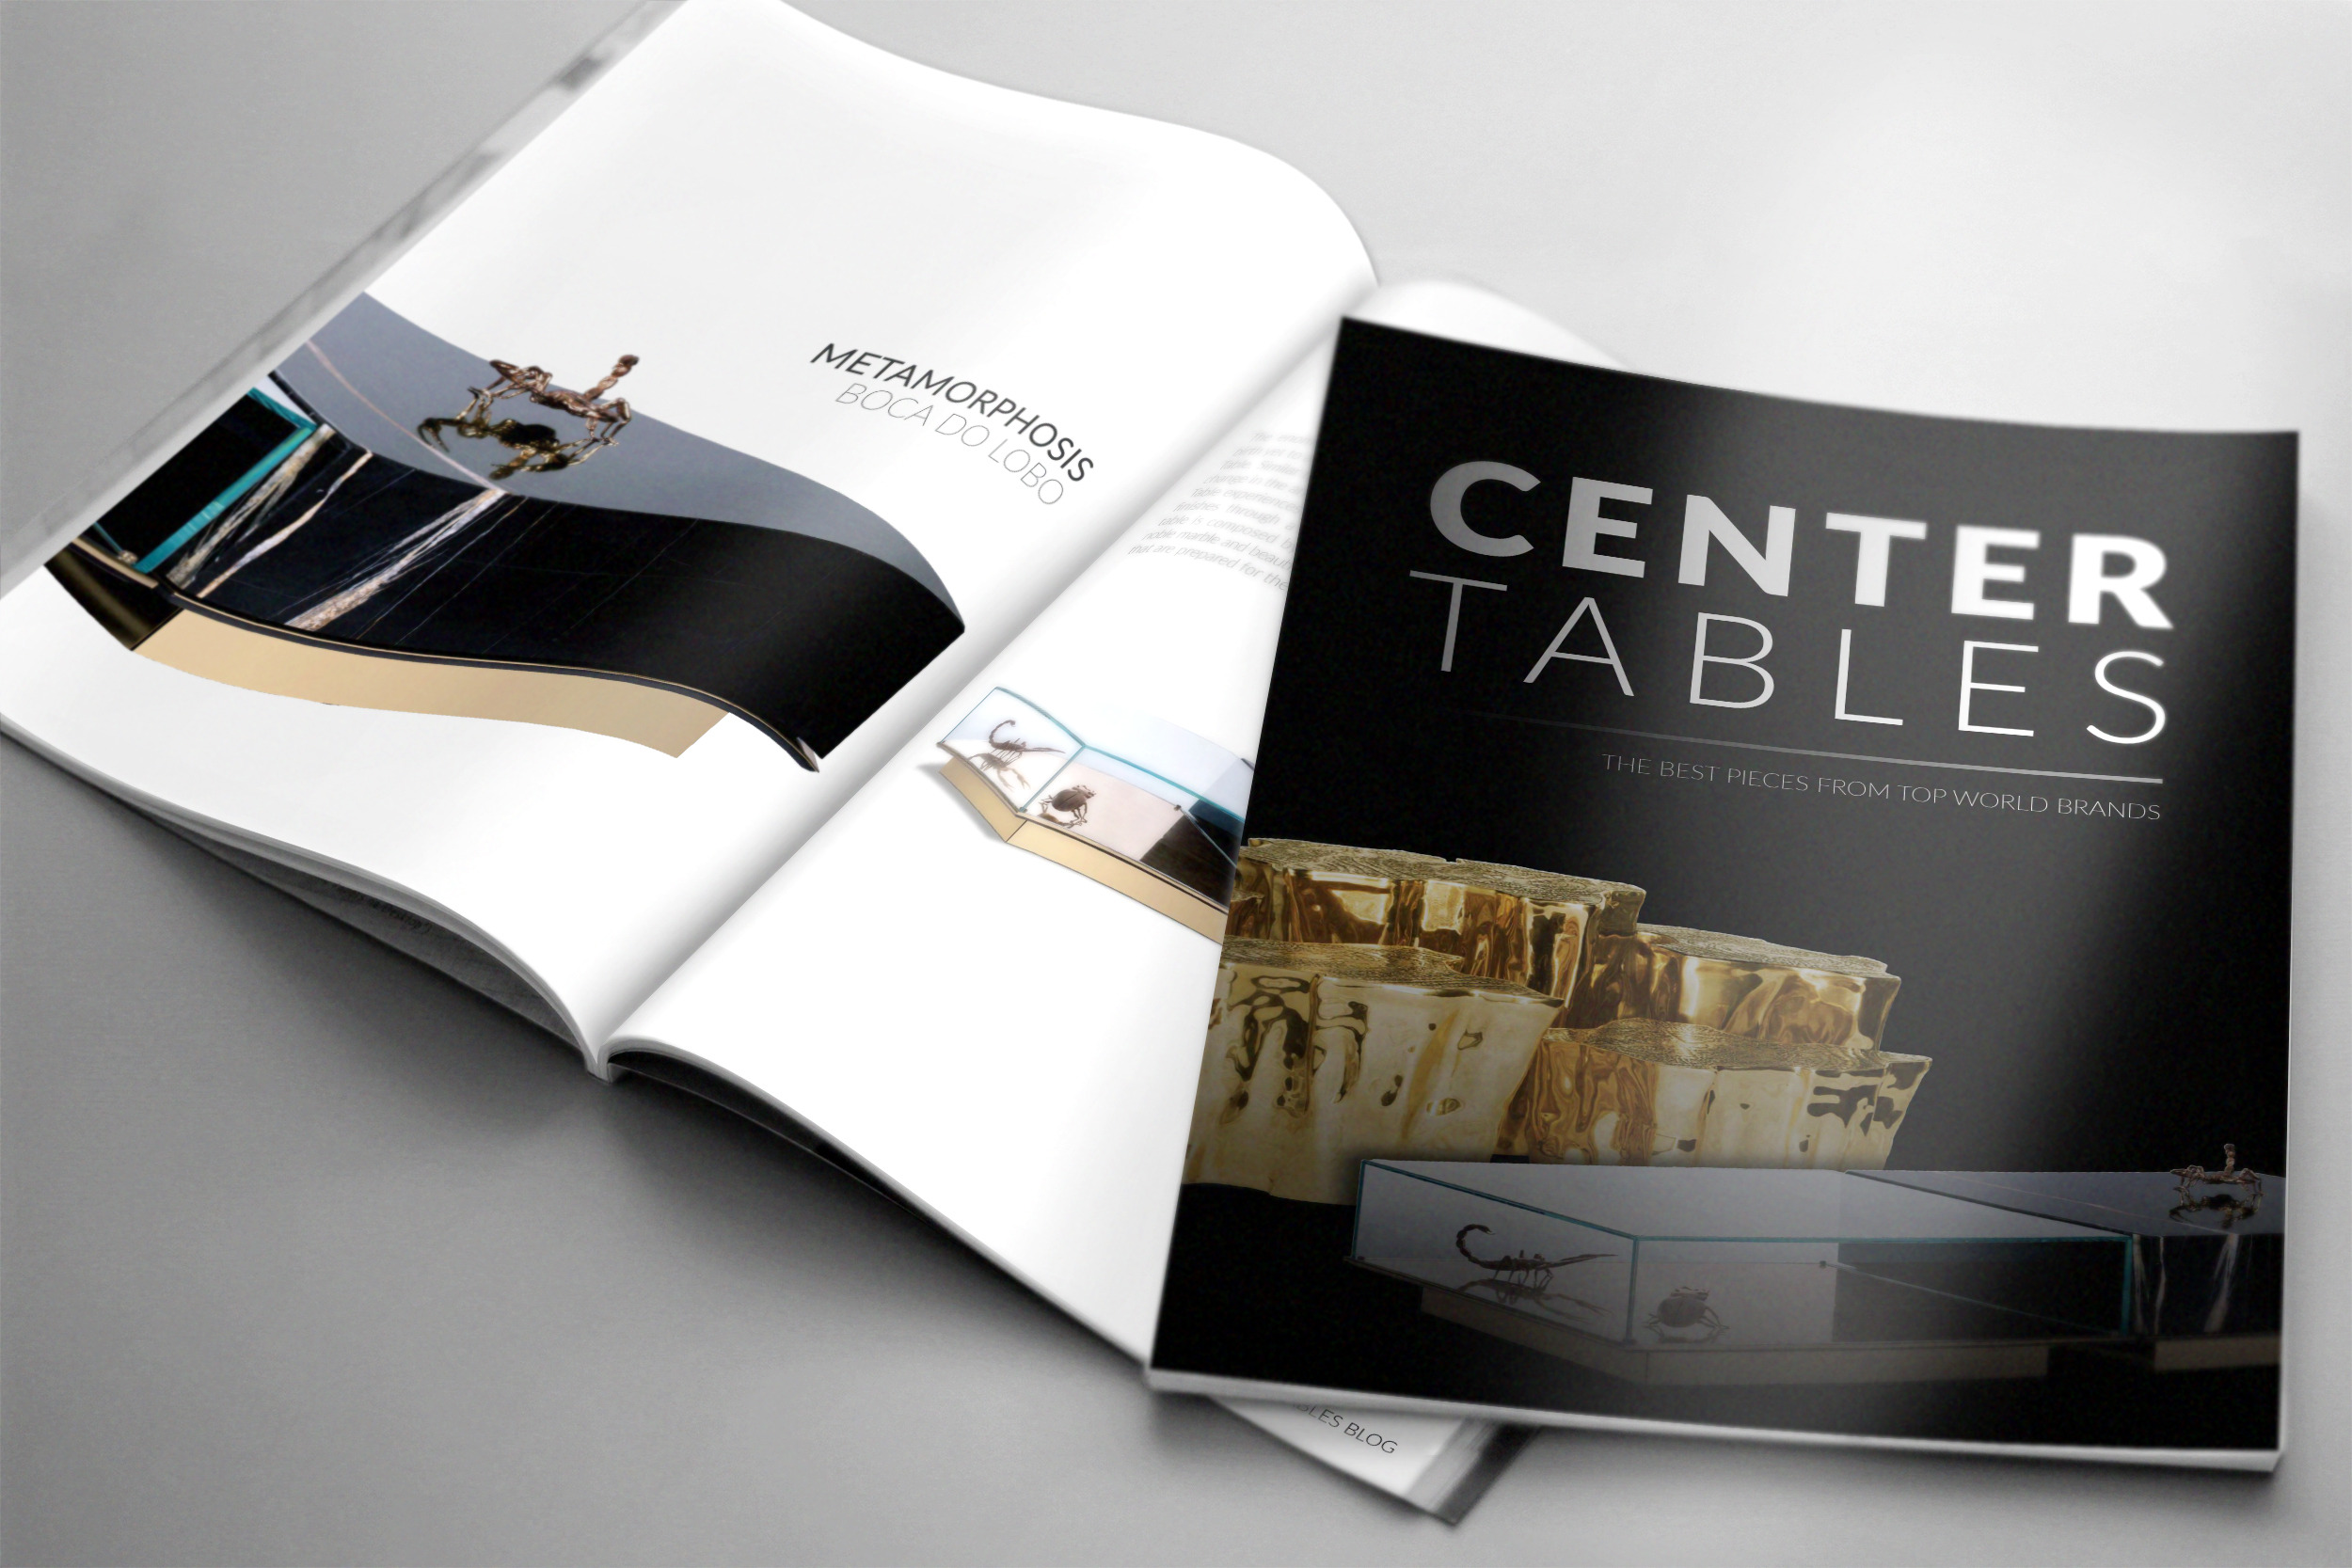 Have you had the opportunity to download our FREE EBOOK?? Don't miss out on this unique opportunity! 👉🏼 DOWNLOAD HERE http://bit.ly/2FXIHua 👈🏼 . . #CenterTablesBlog #interiordesign #FreeEbook